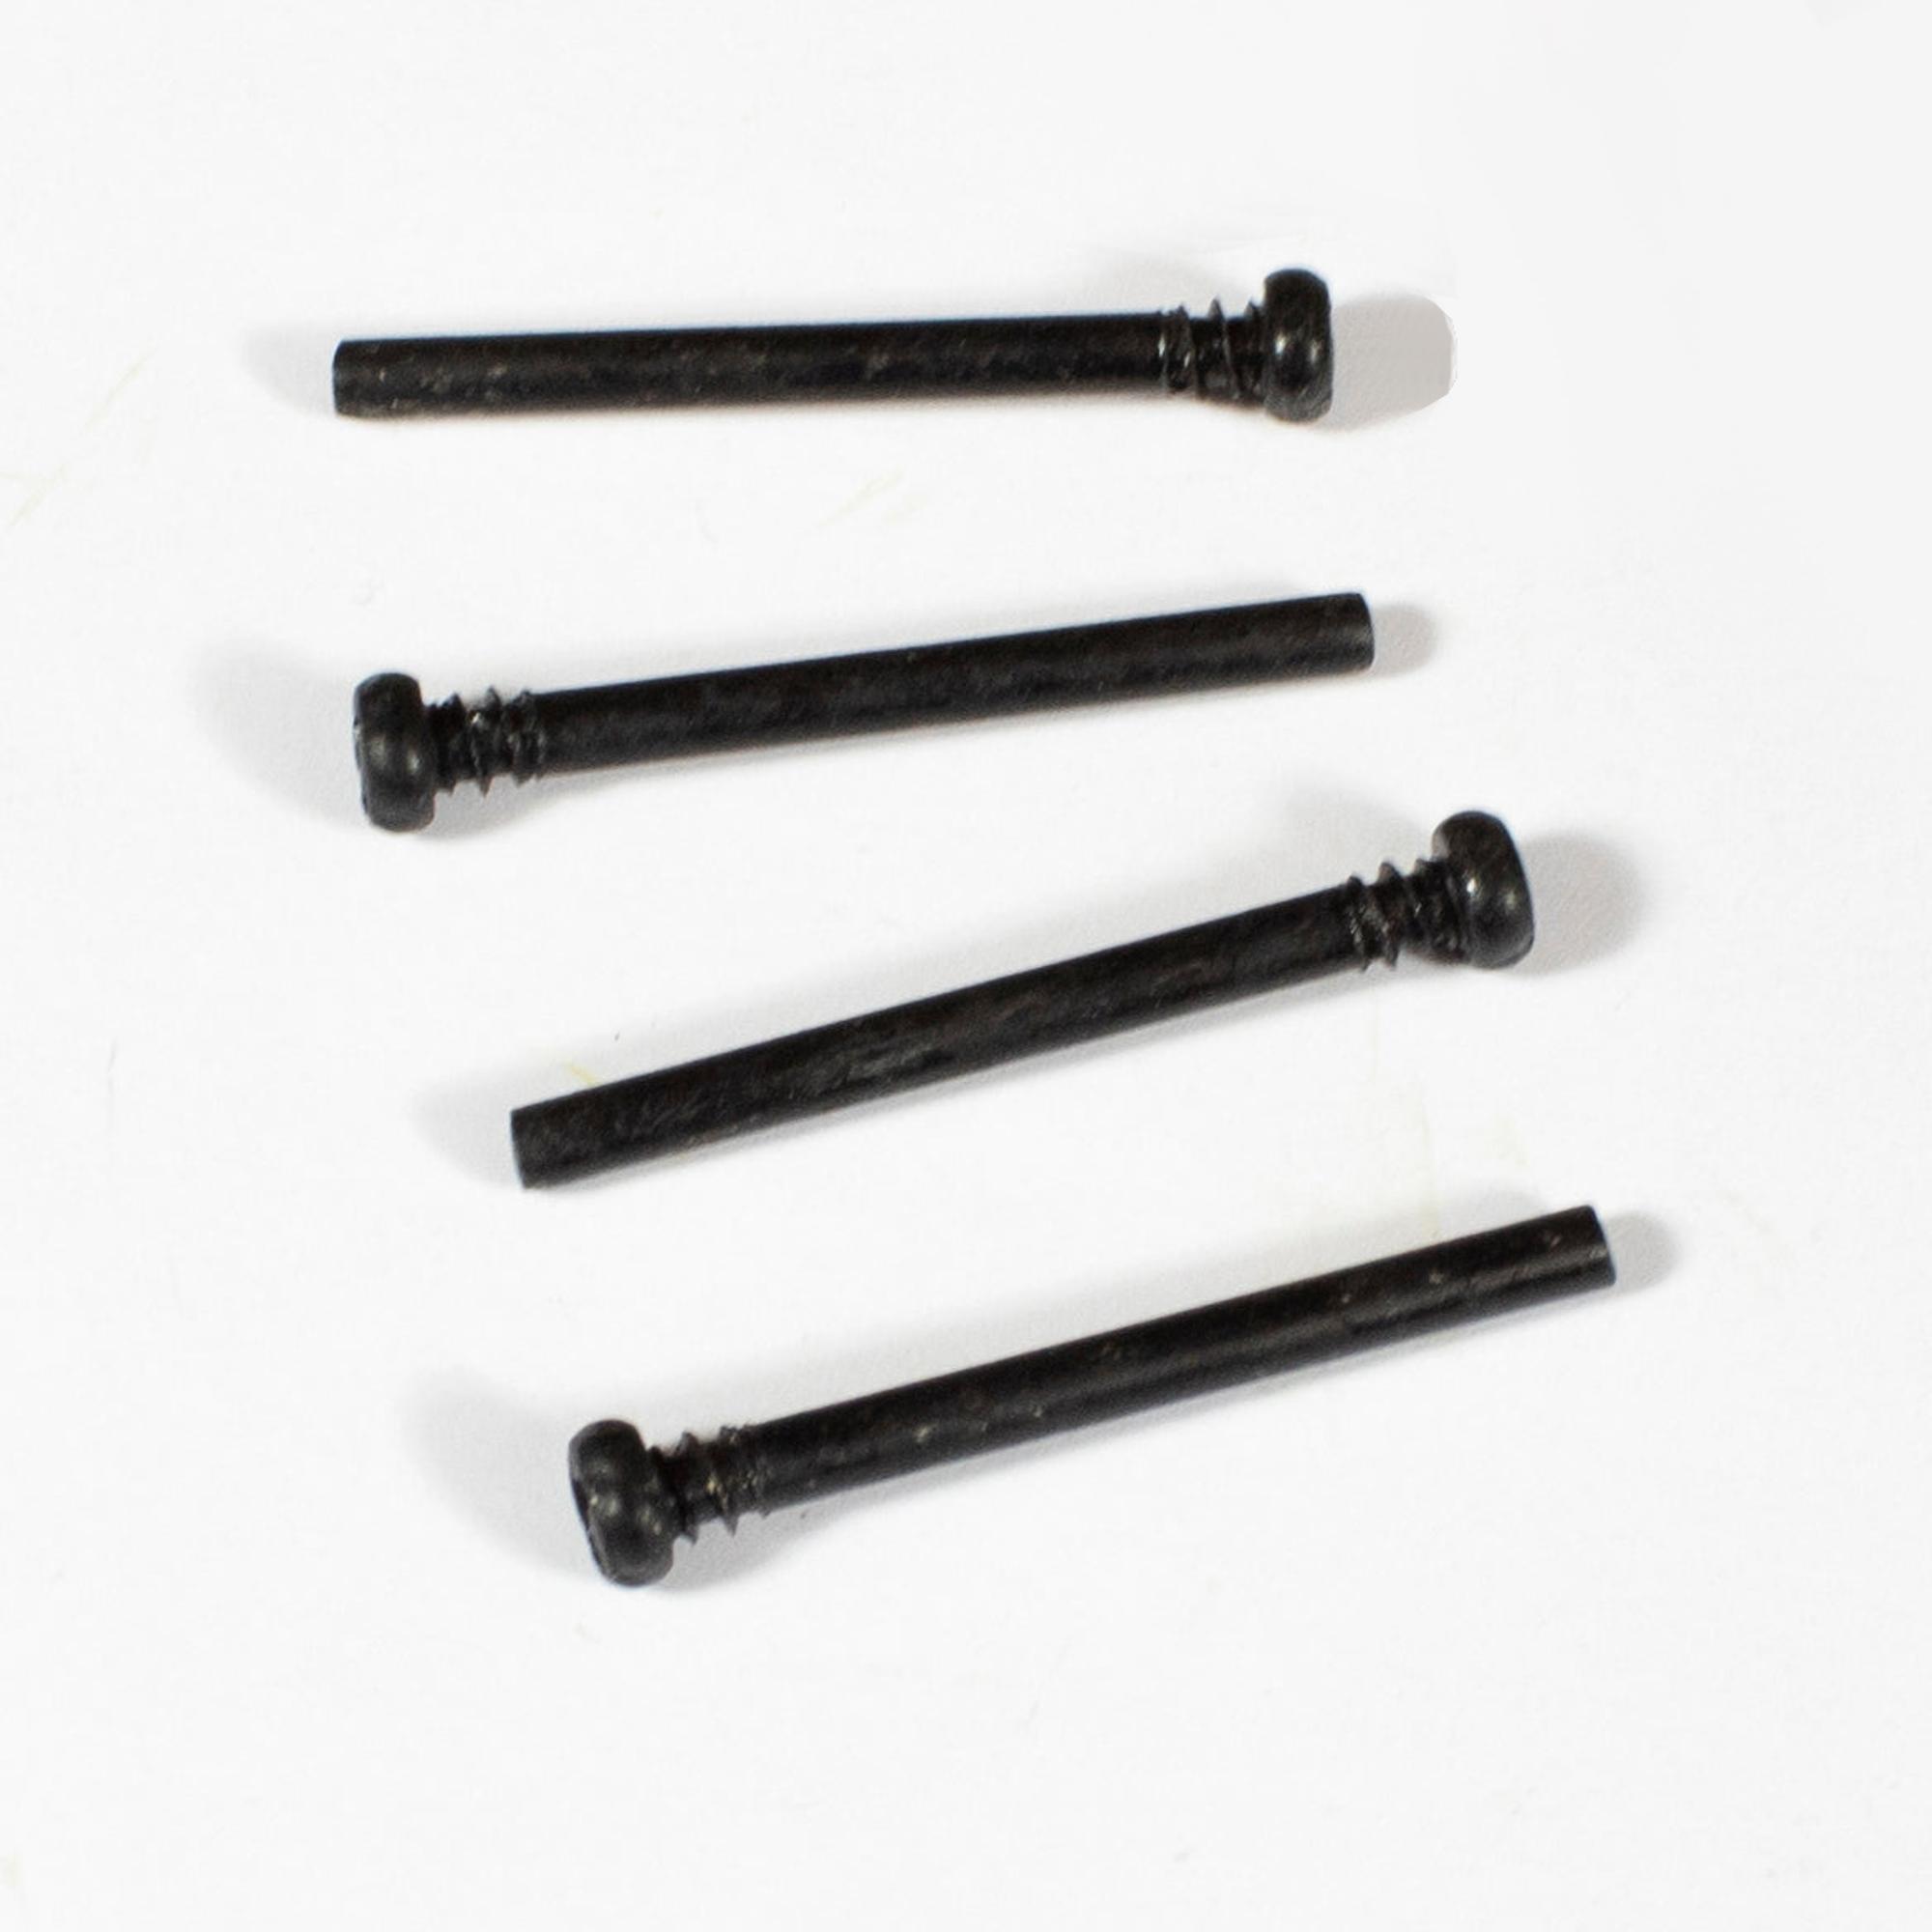 IMEX Front Upper Suspension Hinge Bolts (4 pc)